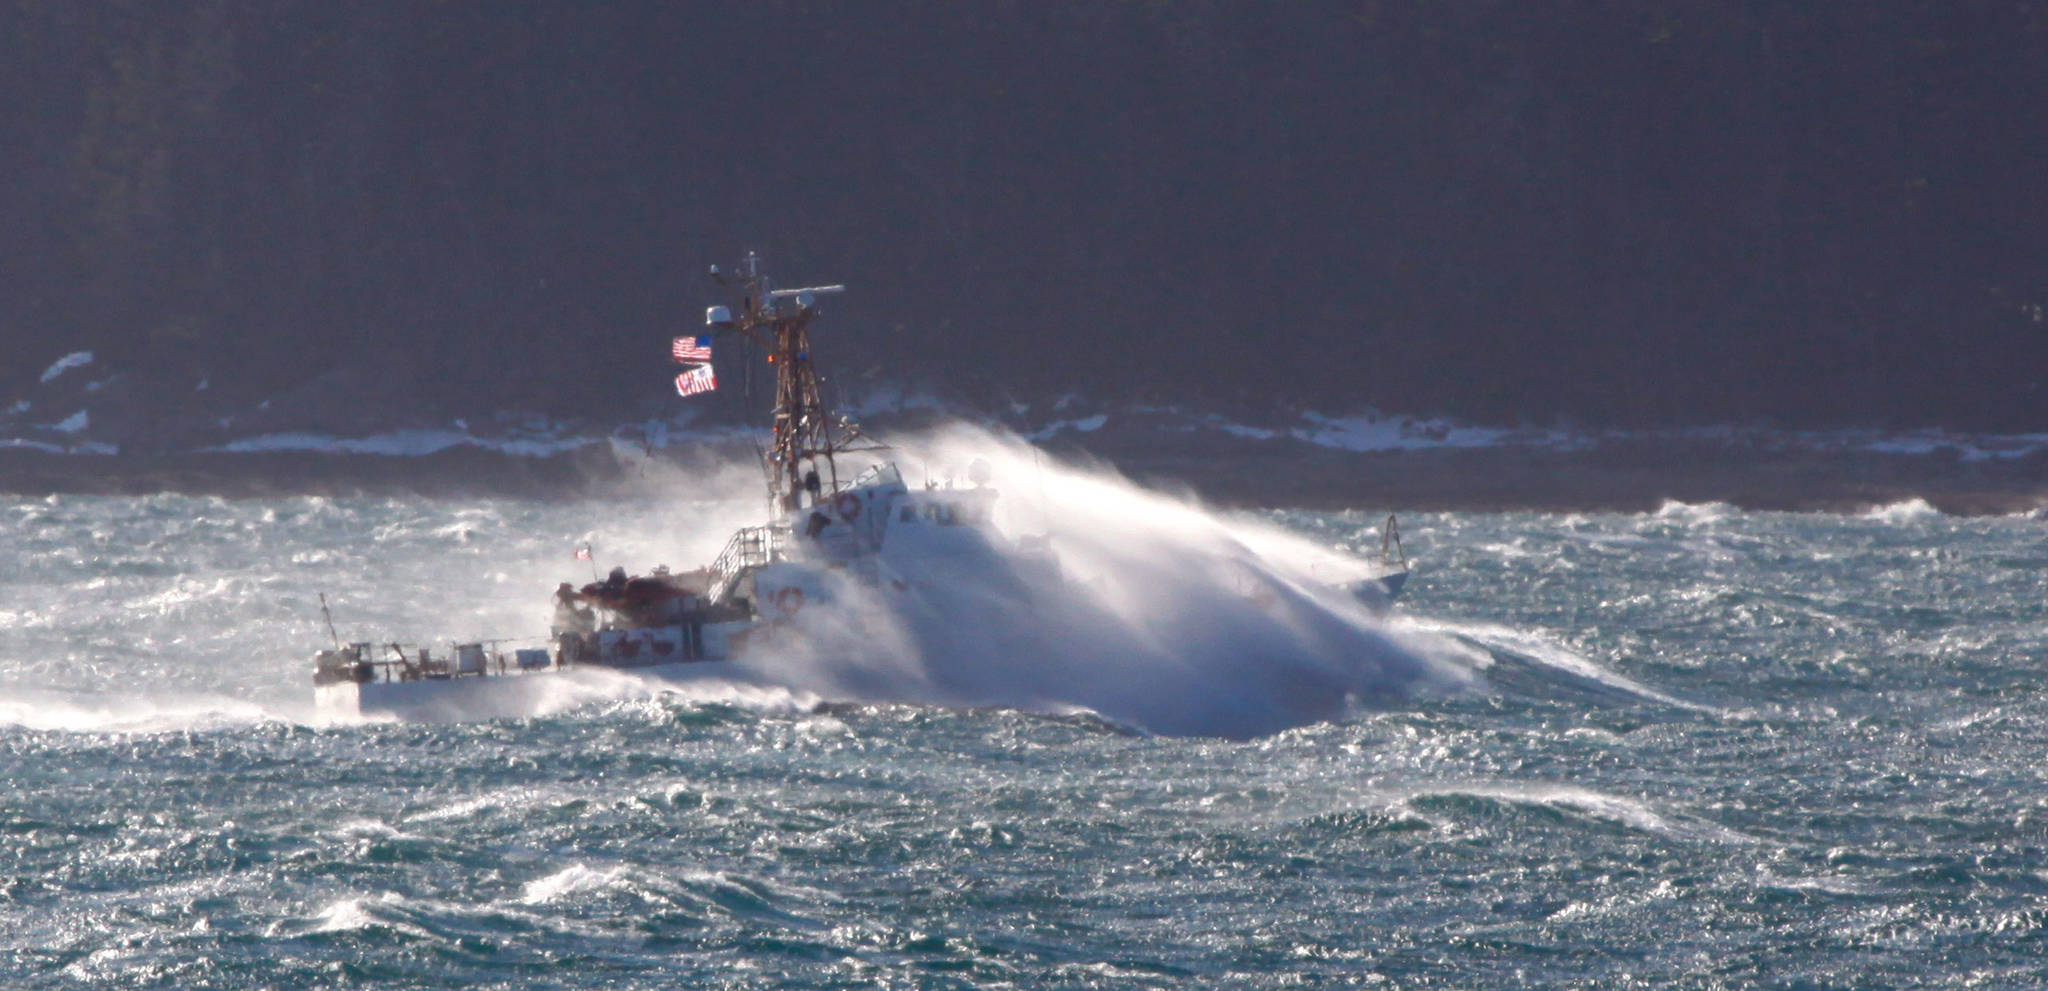 The 110-foot United States Coast Guard Cutter Liberty cuts through rough water off South Shelter.(Photo by Jay Beedle)